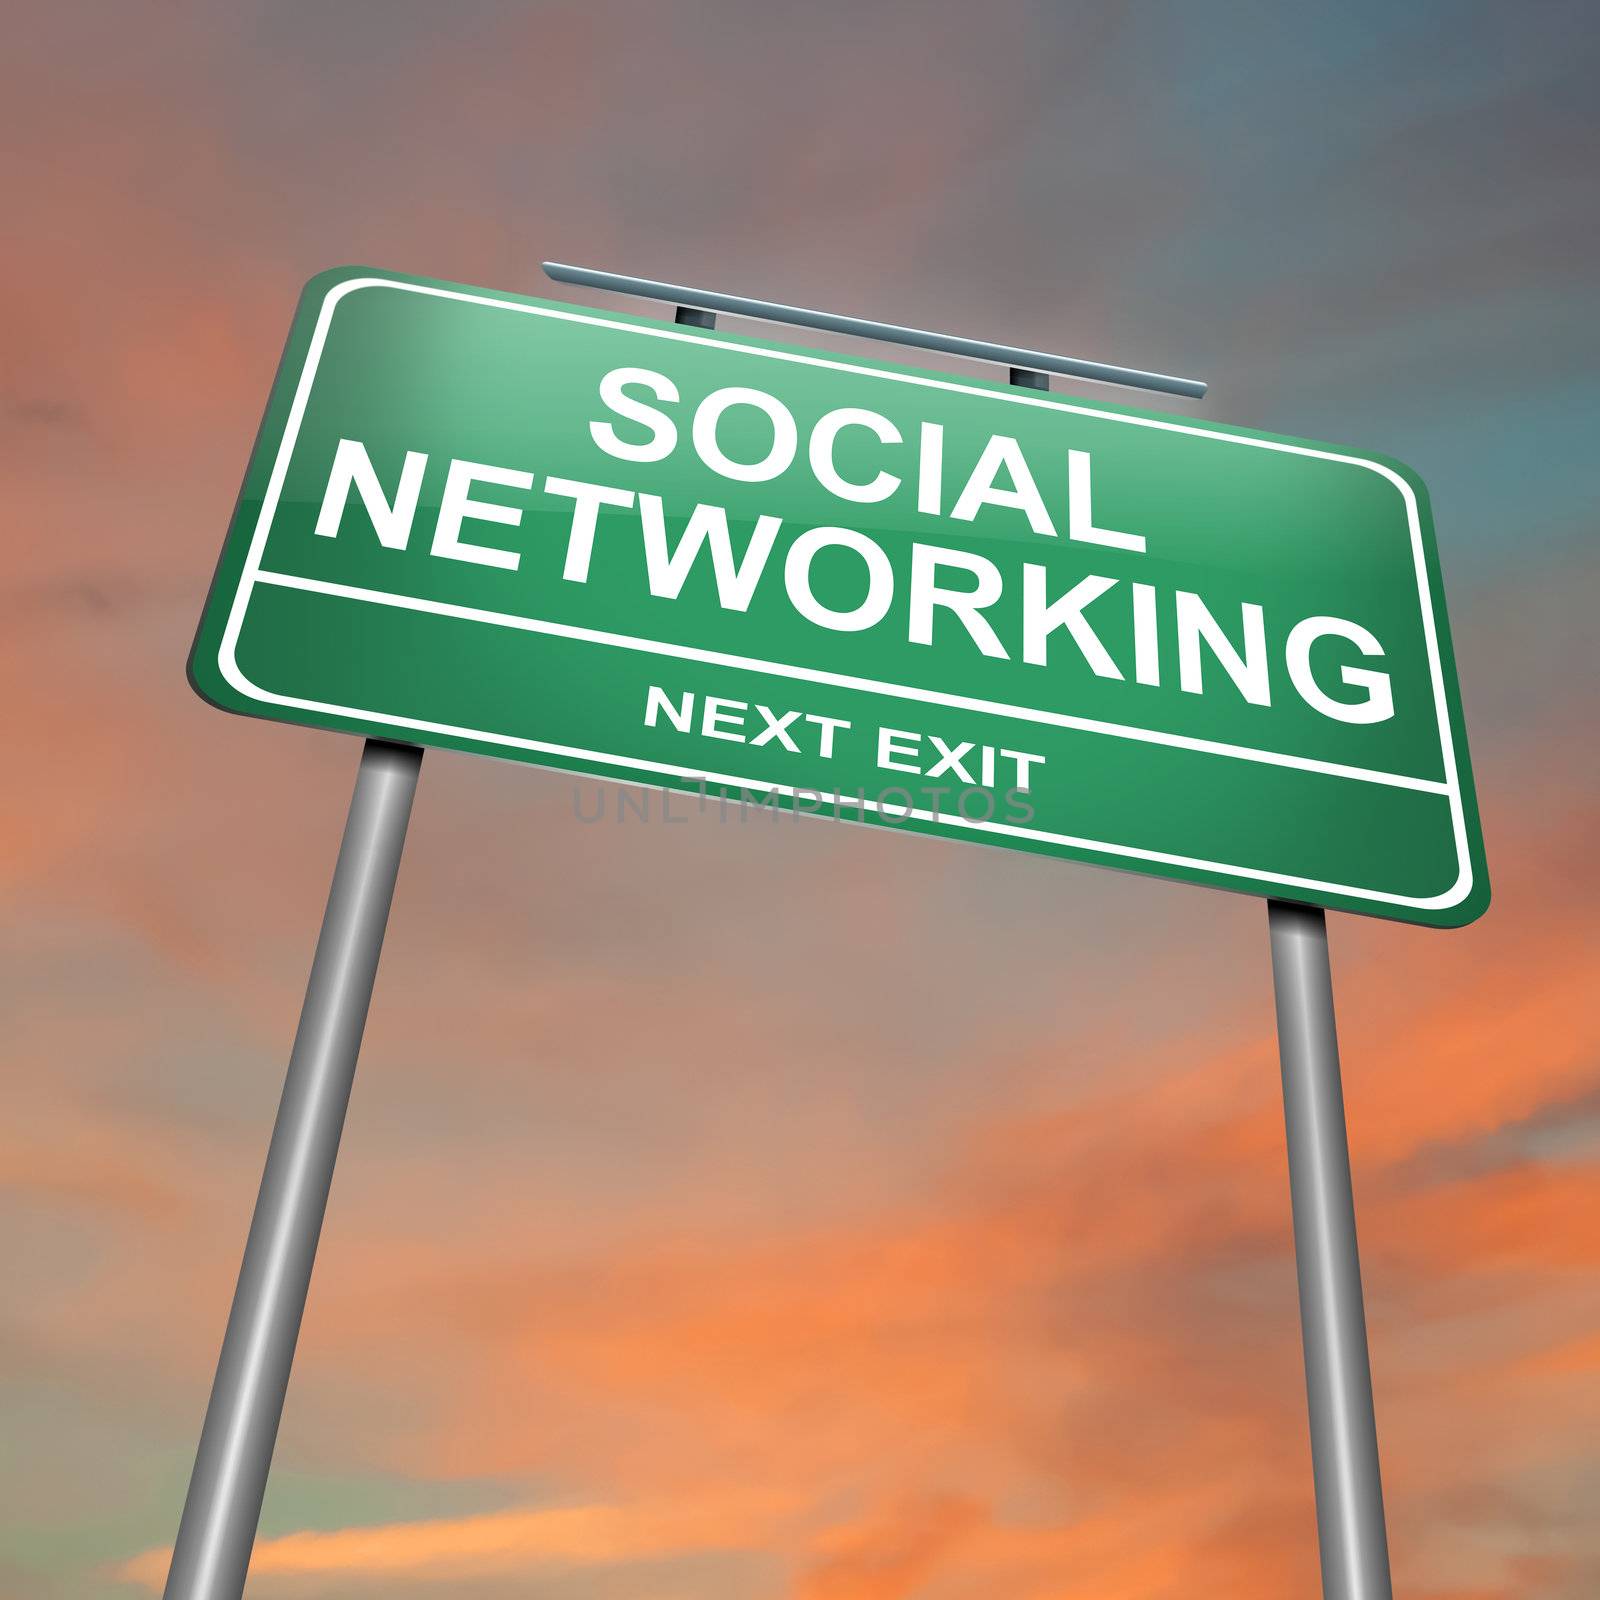 Illustration depicting a green roadsign with a social networking concept. Sunset sky background.